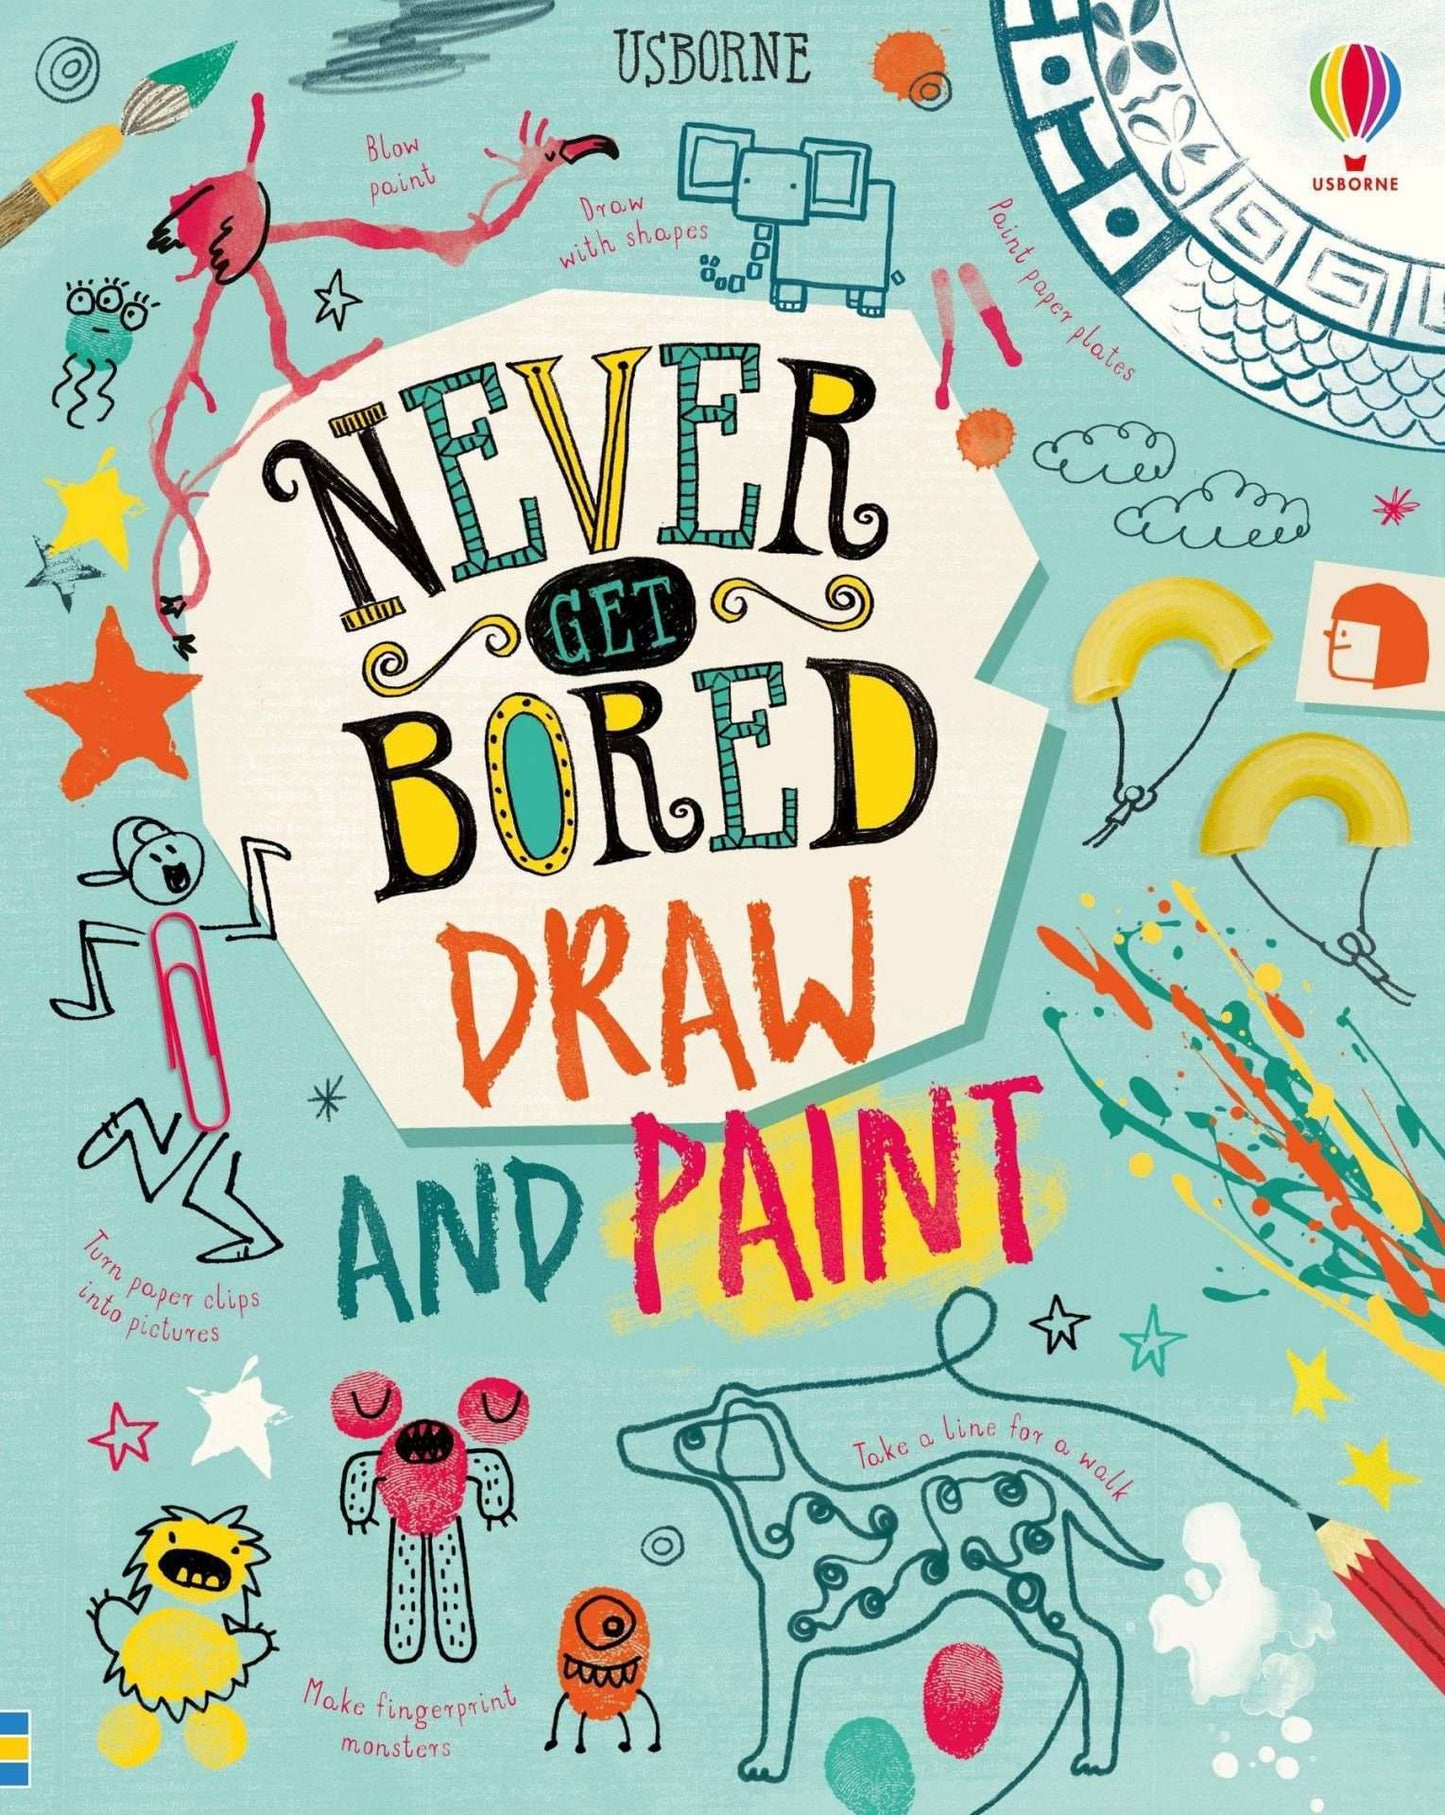 Usborne Never Get Bored - Draw and Paint - Book